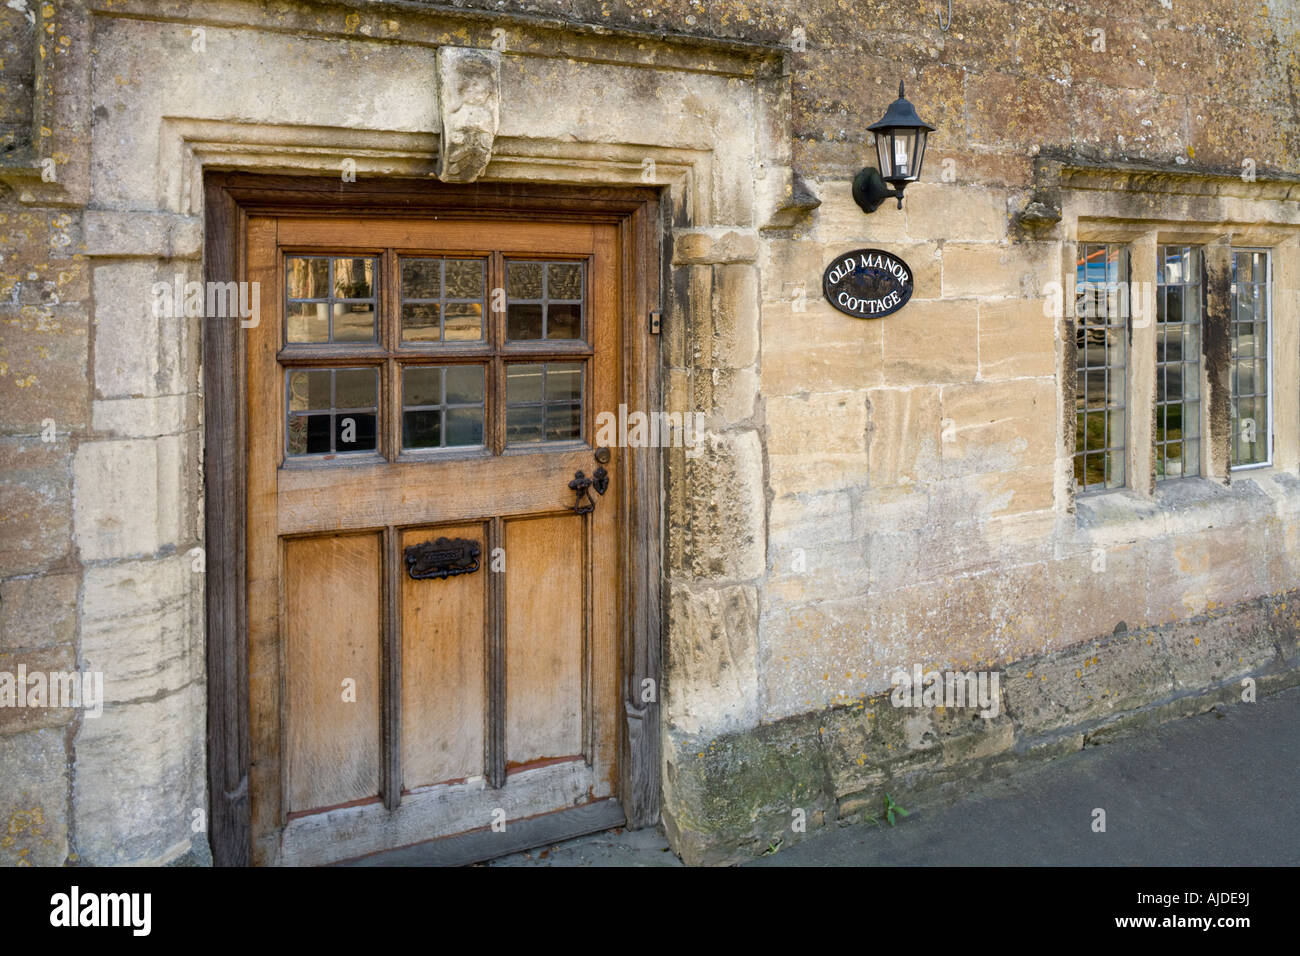 Stone drip mouldings around the door and window of Old Manor Cottage in the Cotswold town of Northleach, Gloucestershire UK Stock Photo